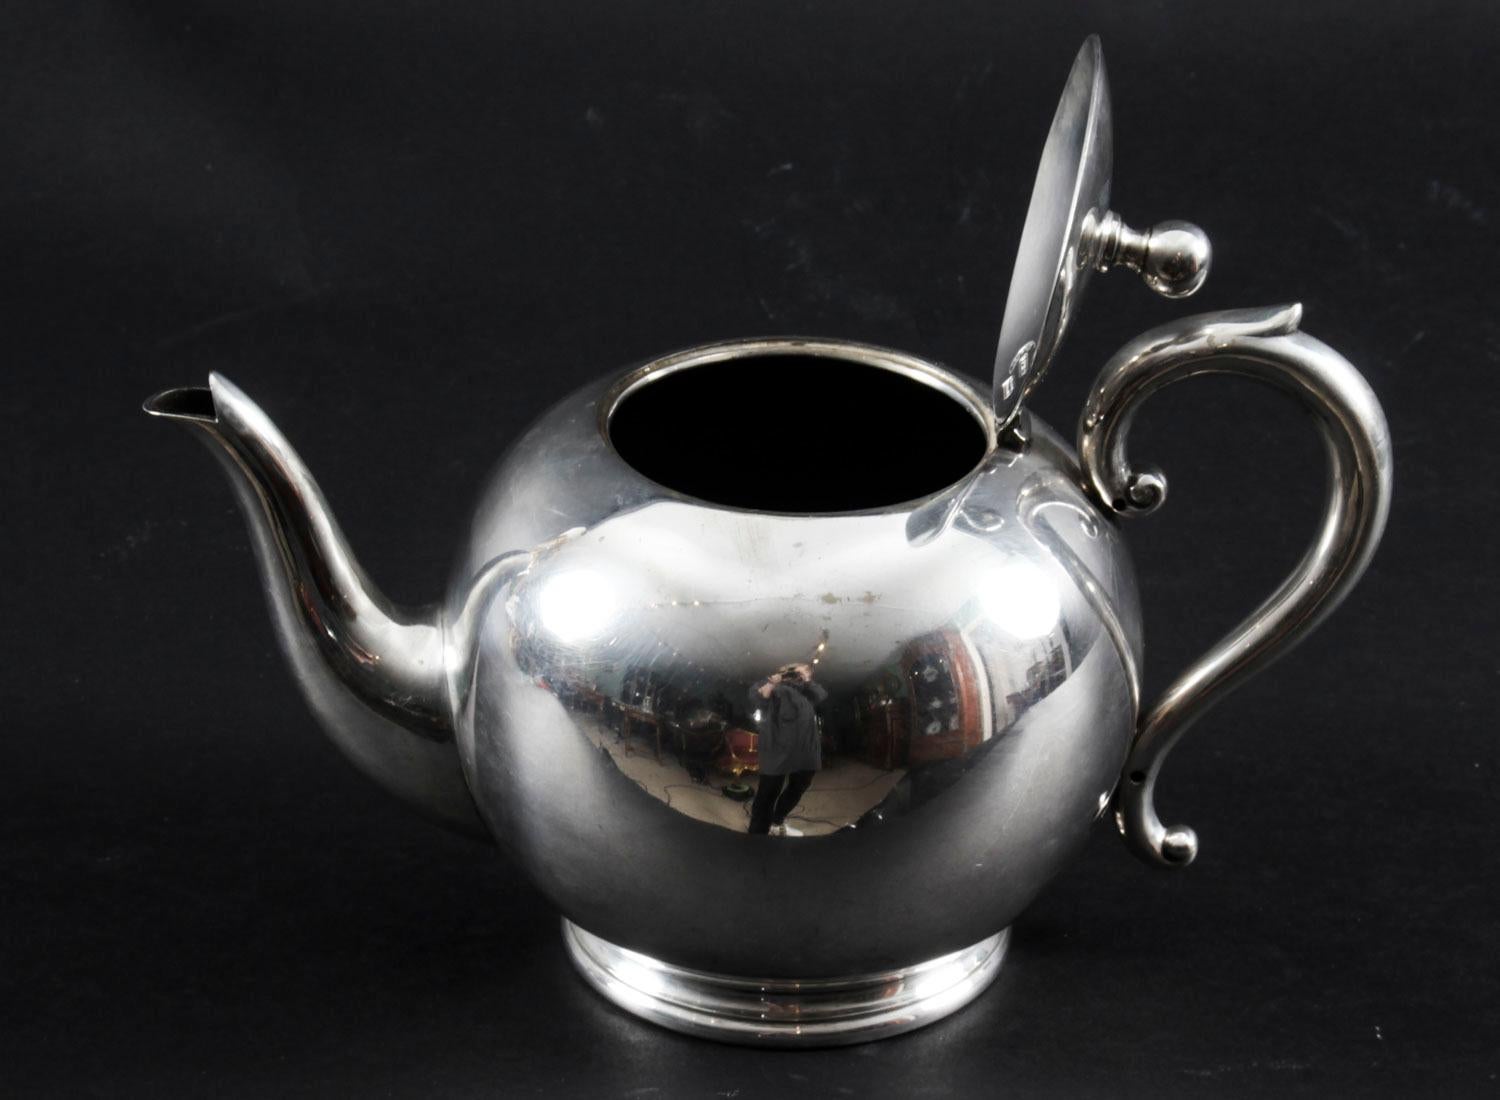 English Antique Art Deco Silver Plated Teapot J B Chatterley & Sons Ltd 1930s